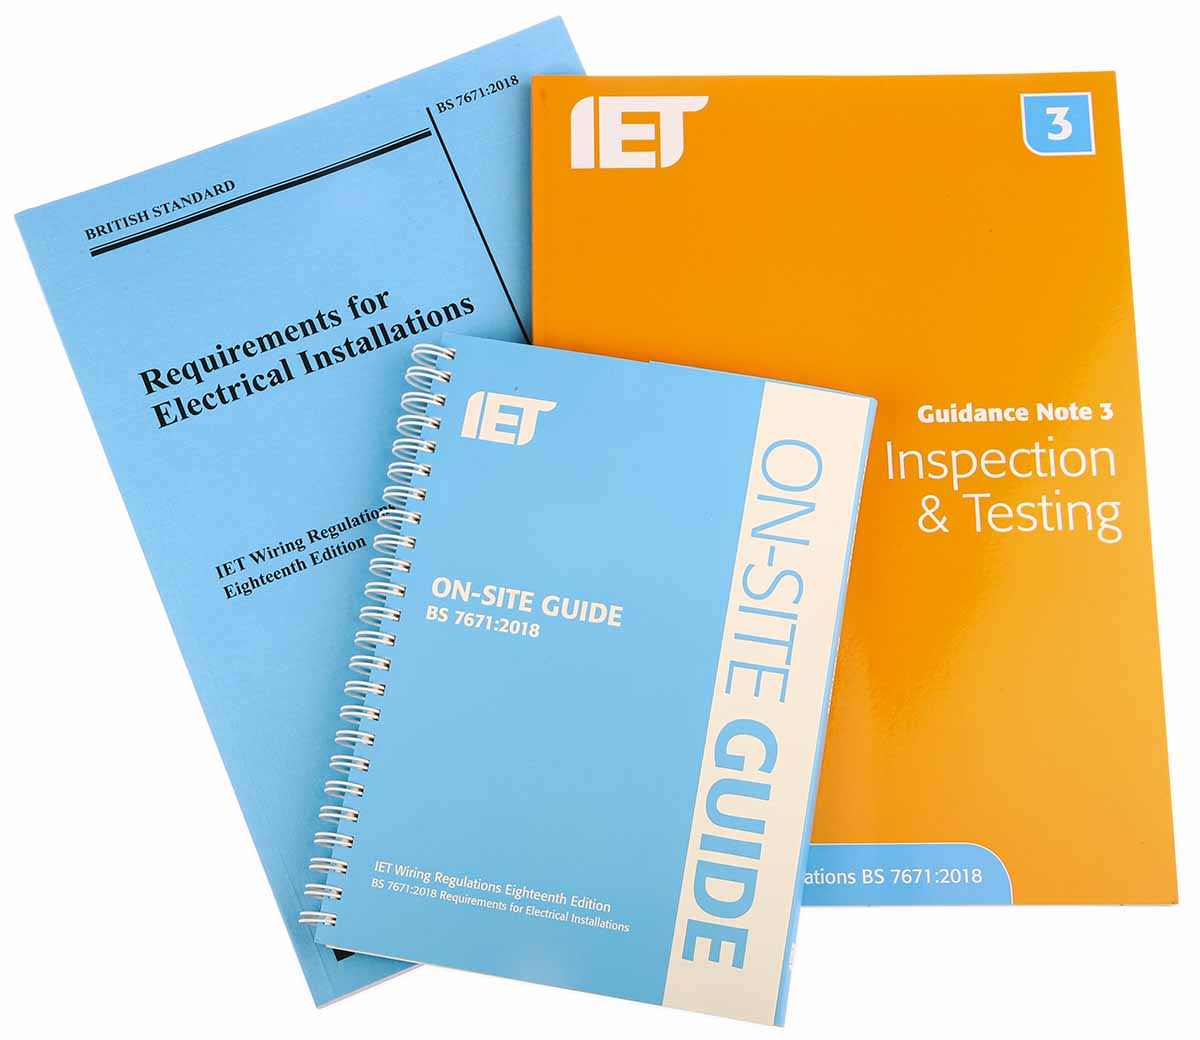 Inspection & Testing Guidance Note 3 8th Ed, On Site Guide 18th Ed, Requirements for Electrical Installations 18th Ed